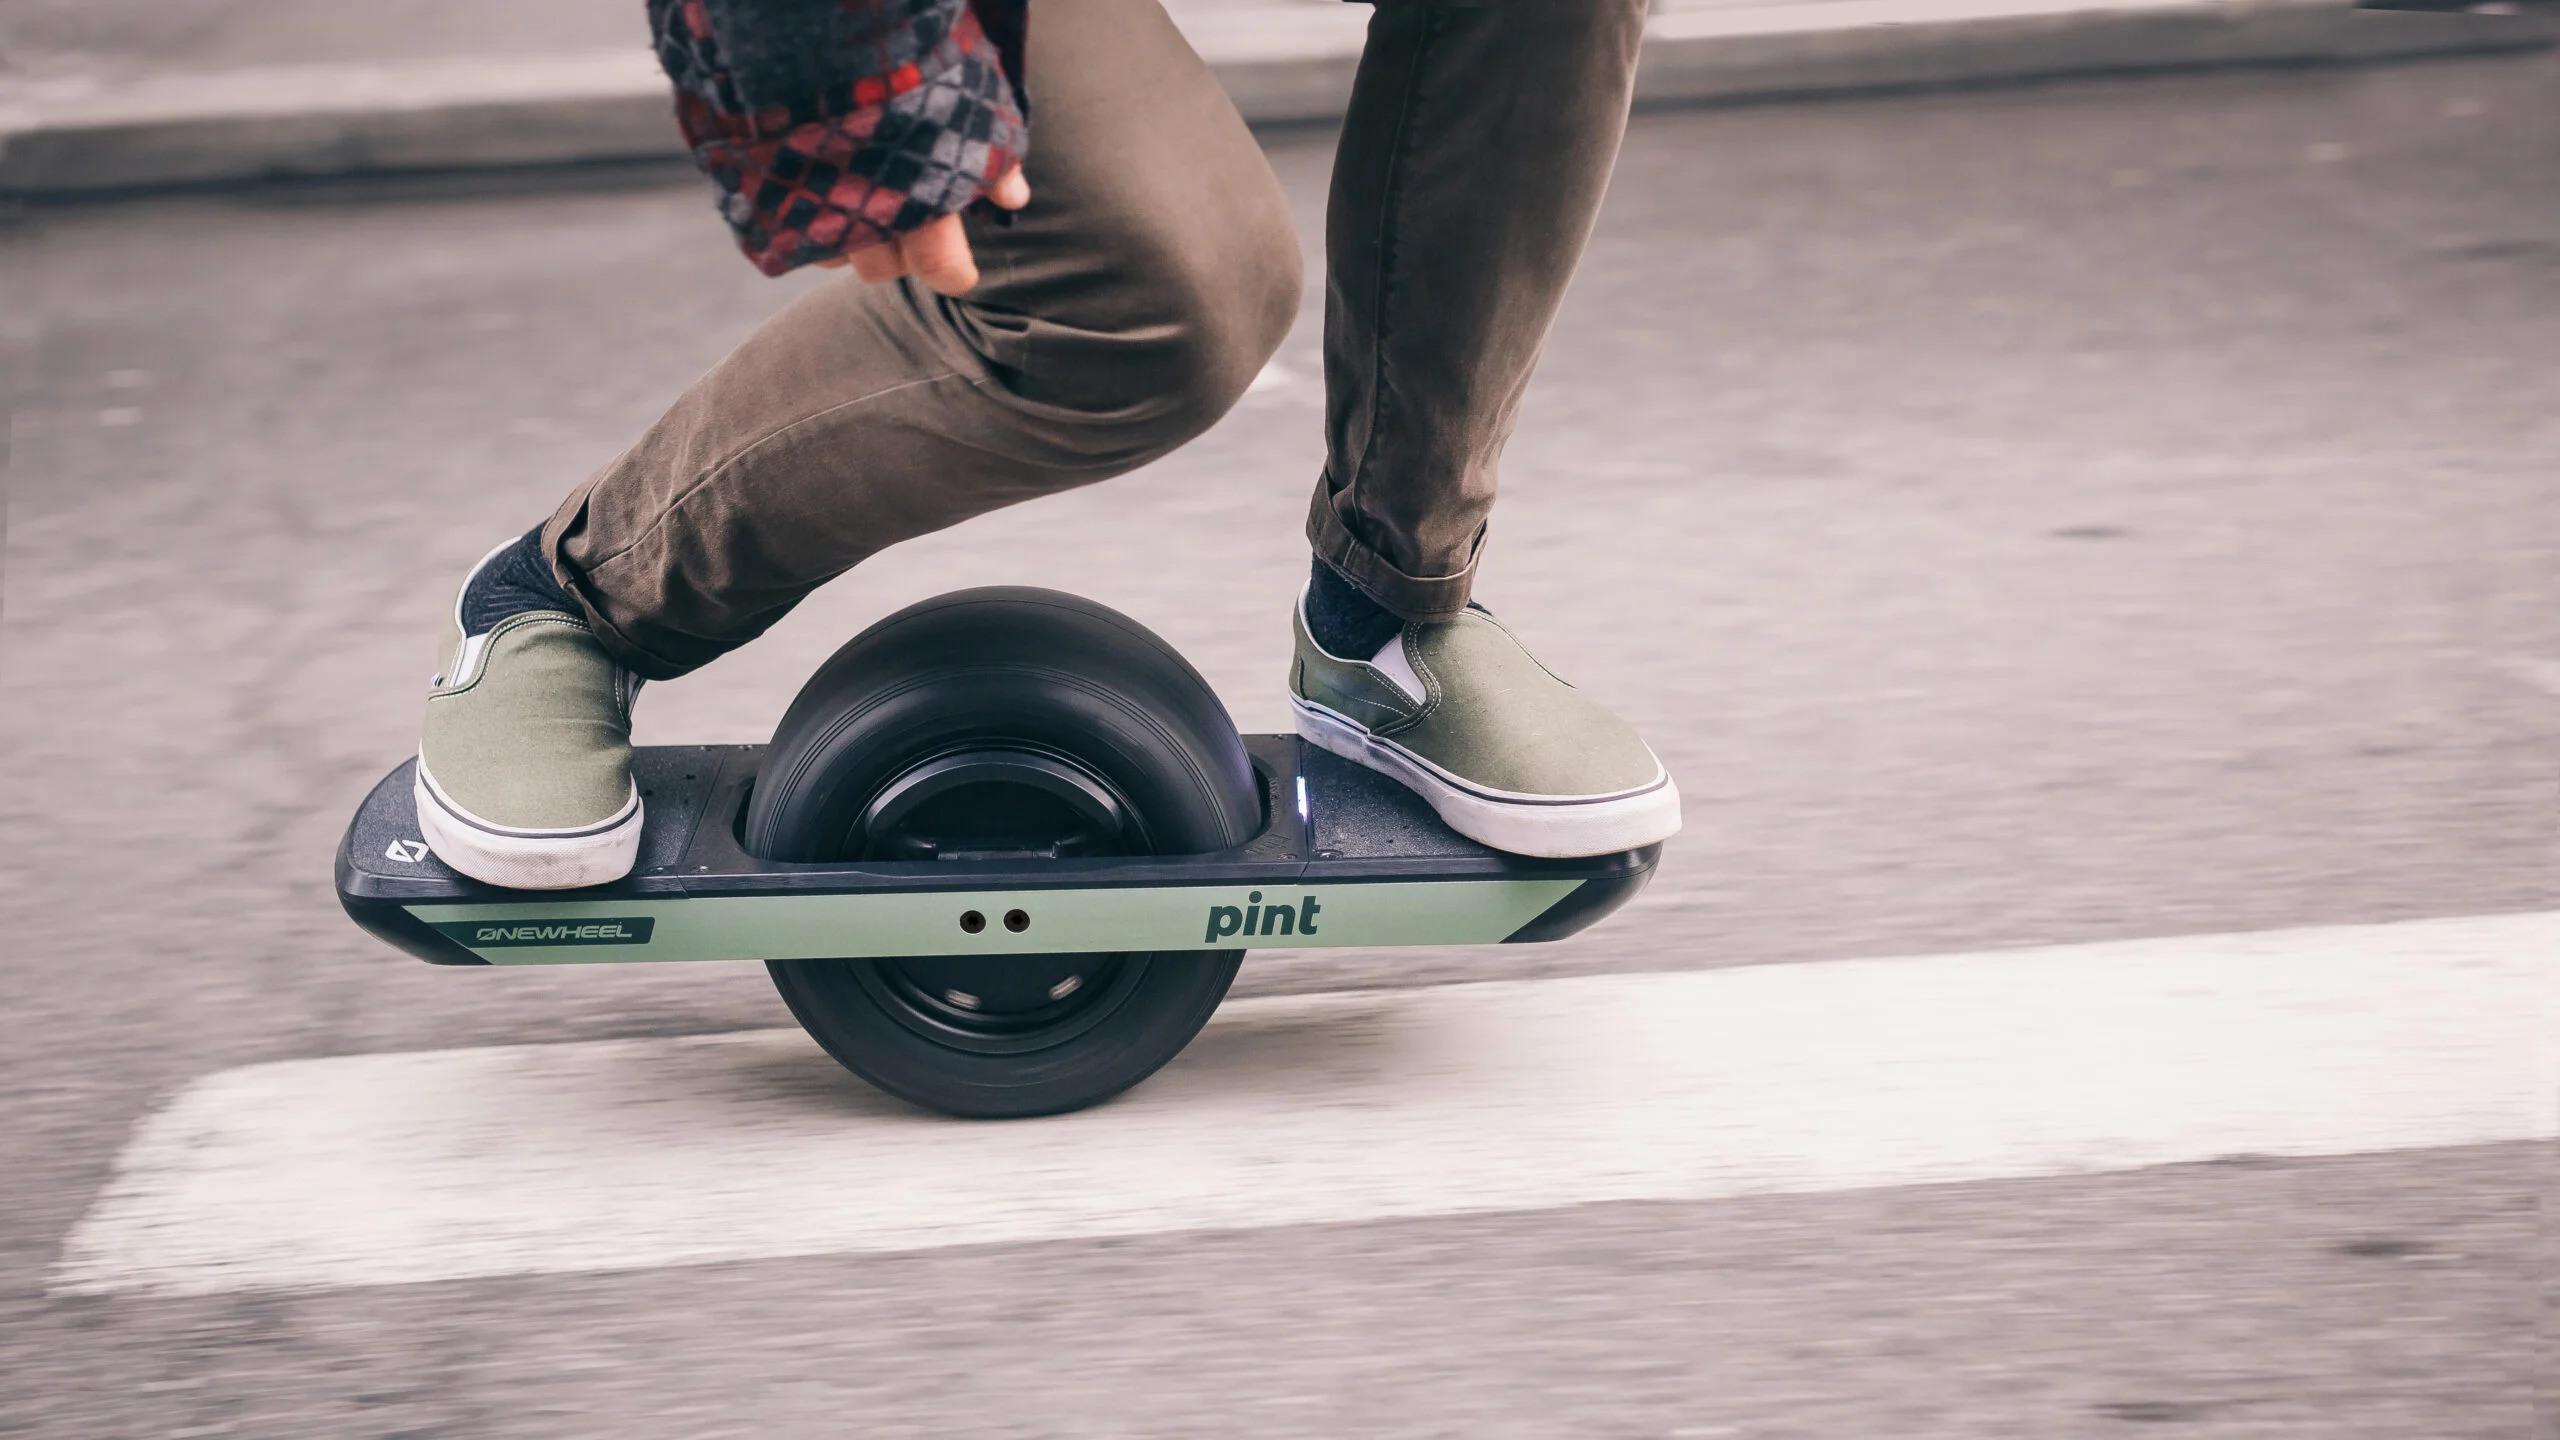 Where Is The Onewheel Electric Skateboard Located